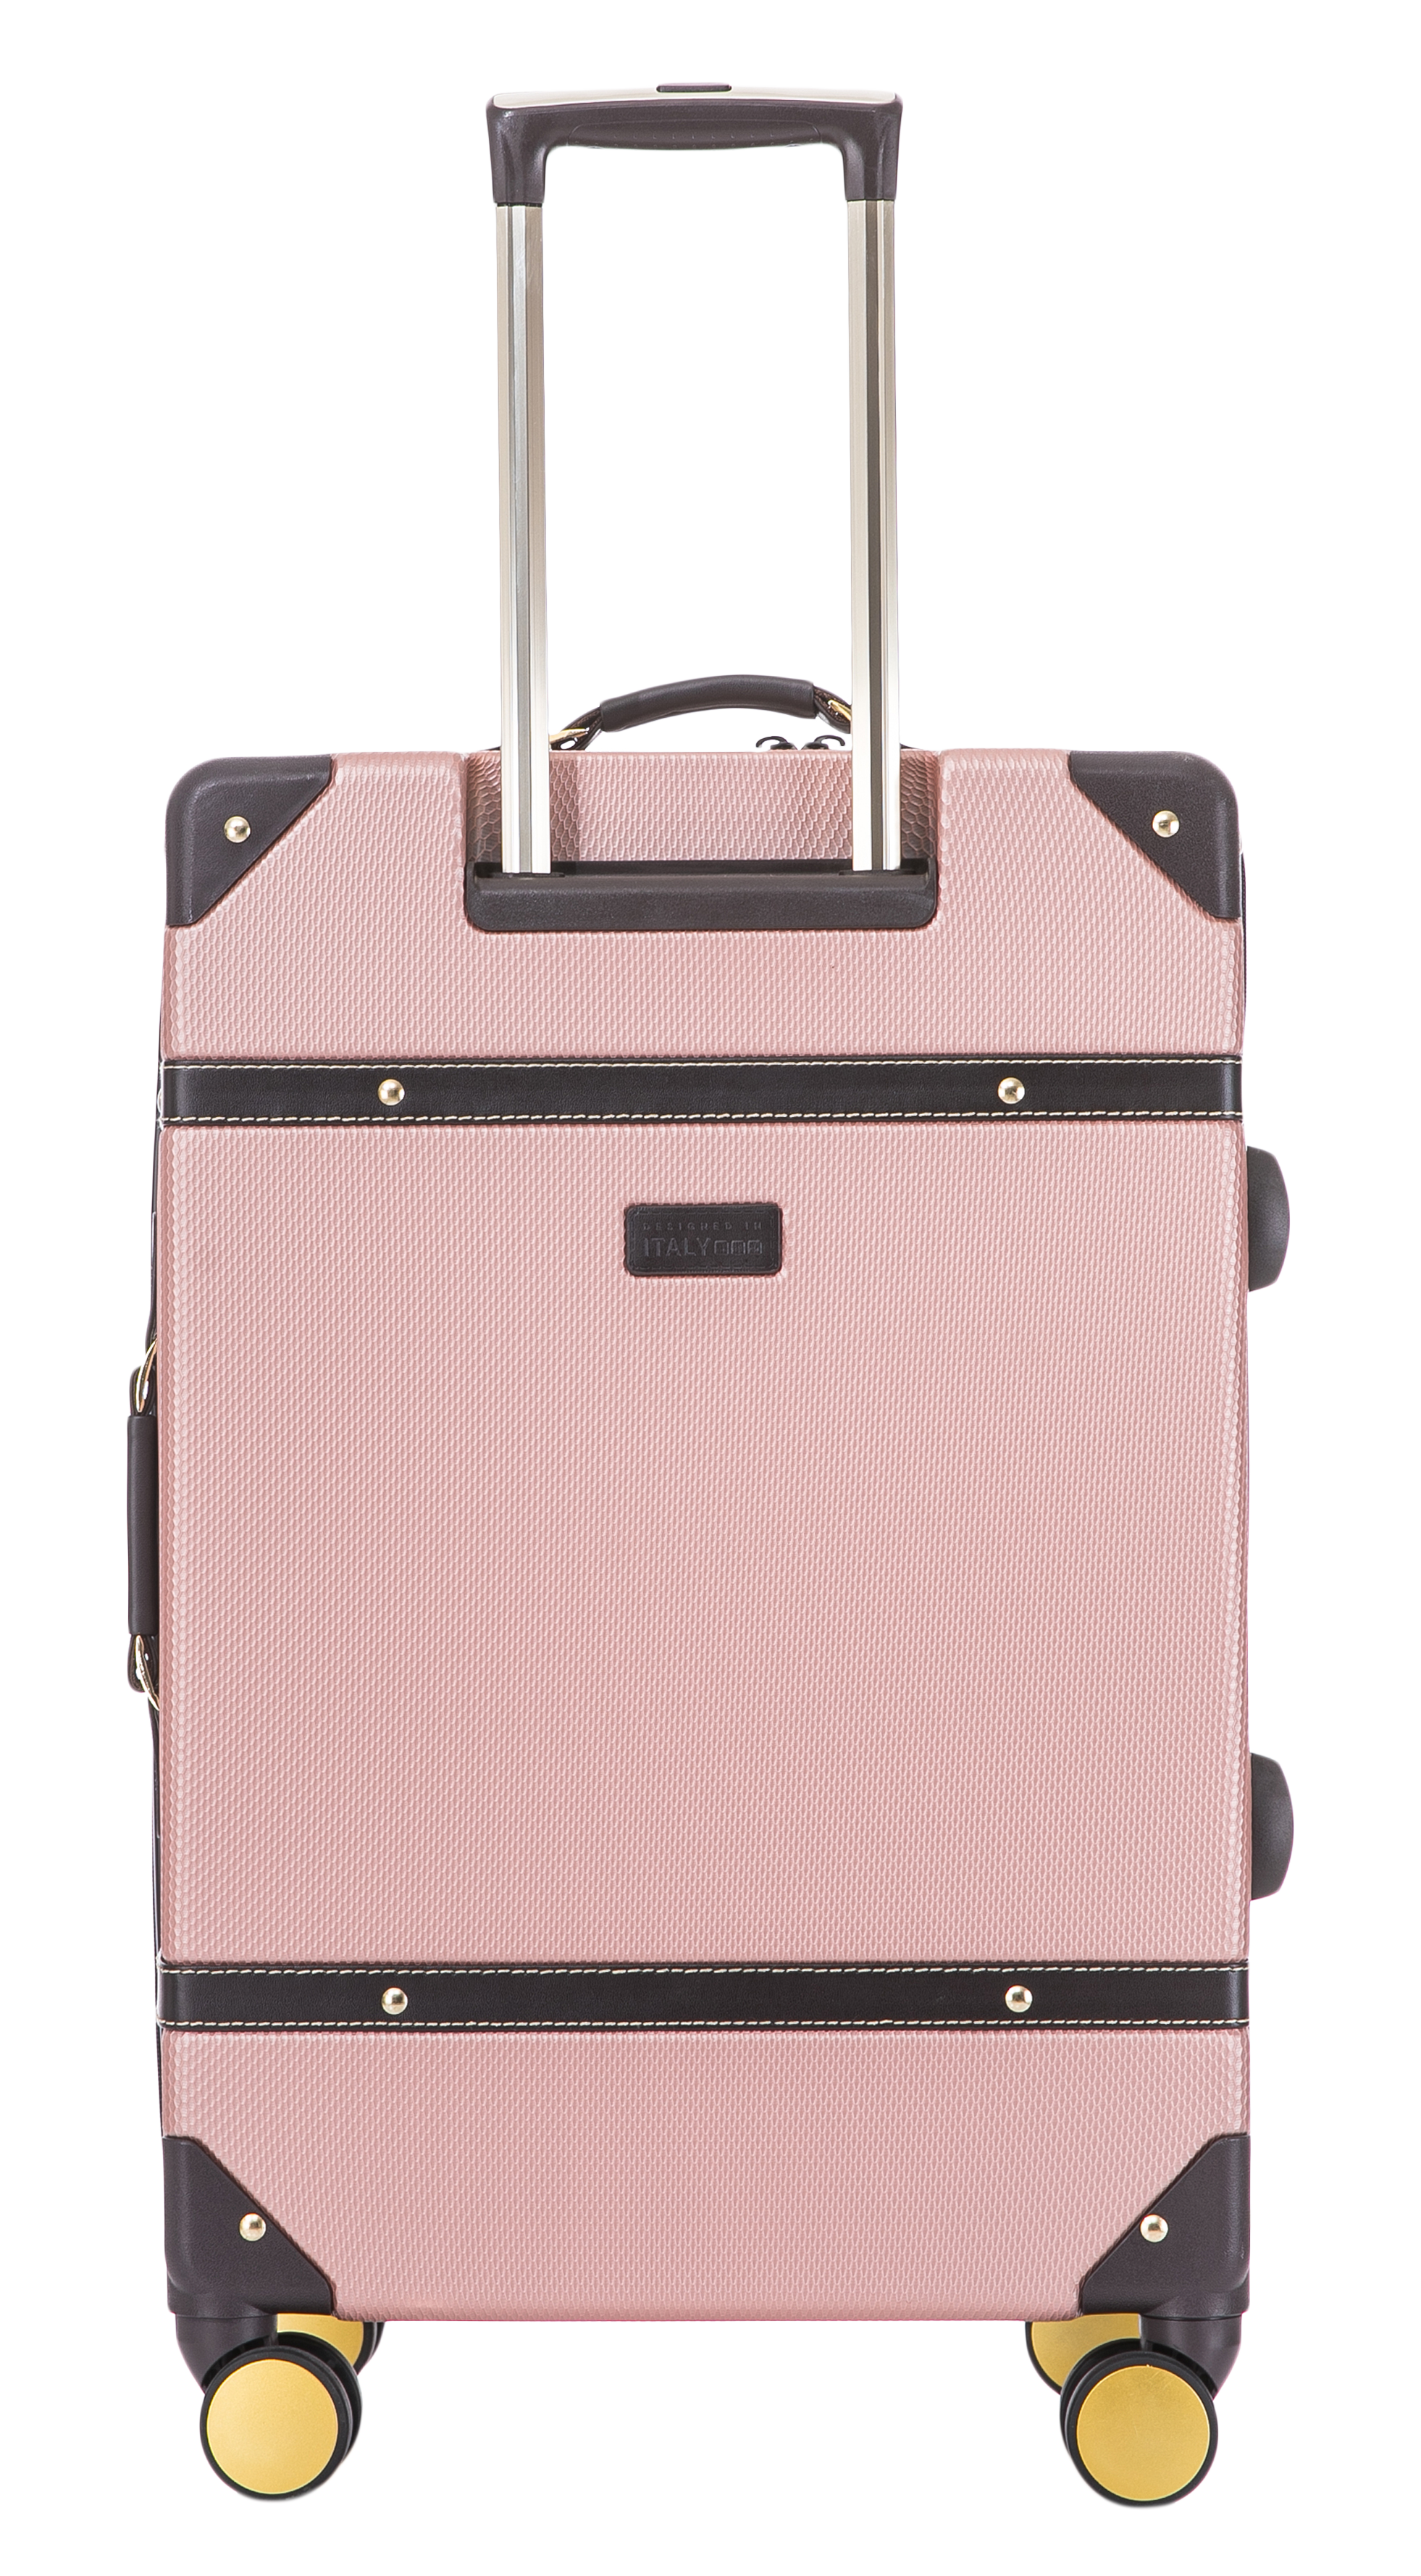 TUCCI Italy LEGATO 20-inch Vinchic Vintage Carry-on Luggage Suitcase